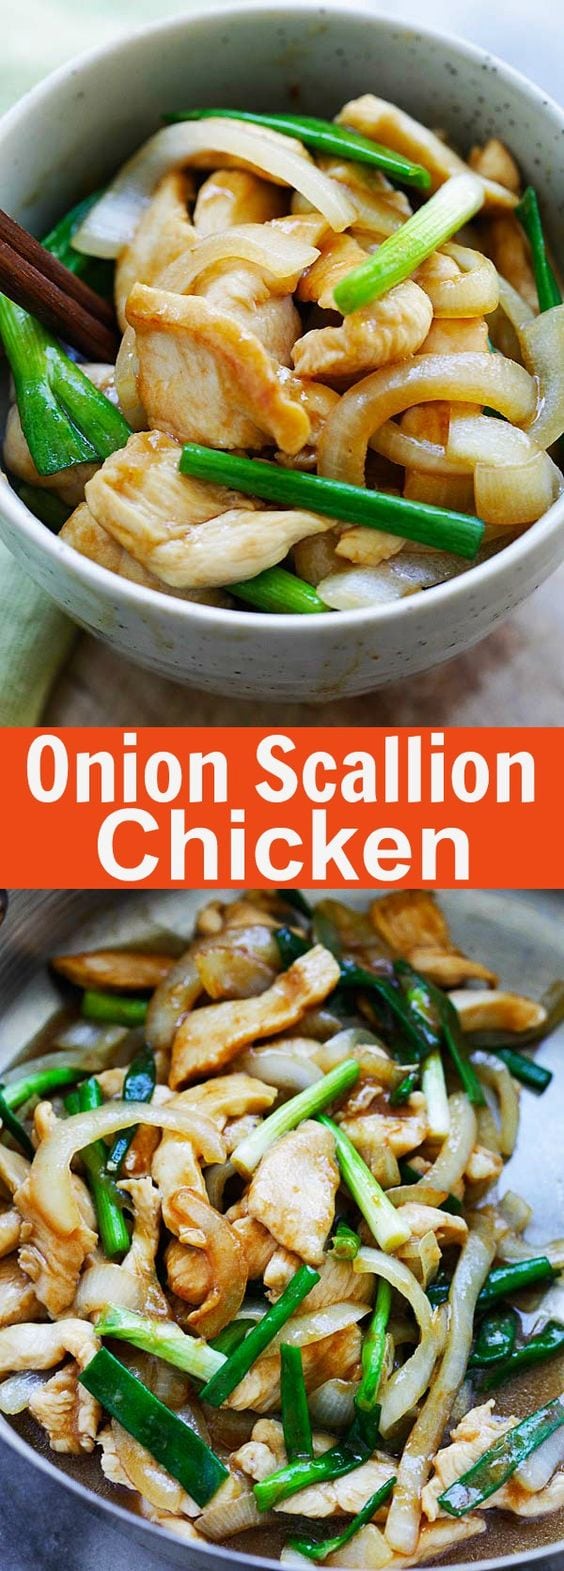 Onion Scallion Chicken - tender and juicy chicken stir-fry with onions and scallions in mouthwatering Chinese brown sauce. This easy recipe takes only 20 minutes and goes well with rice or noodles | rasamalaysia.com